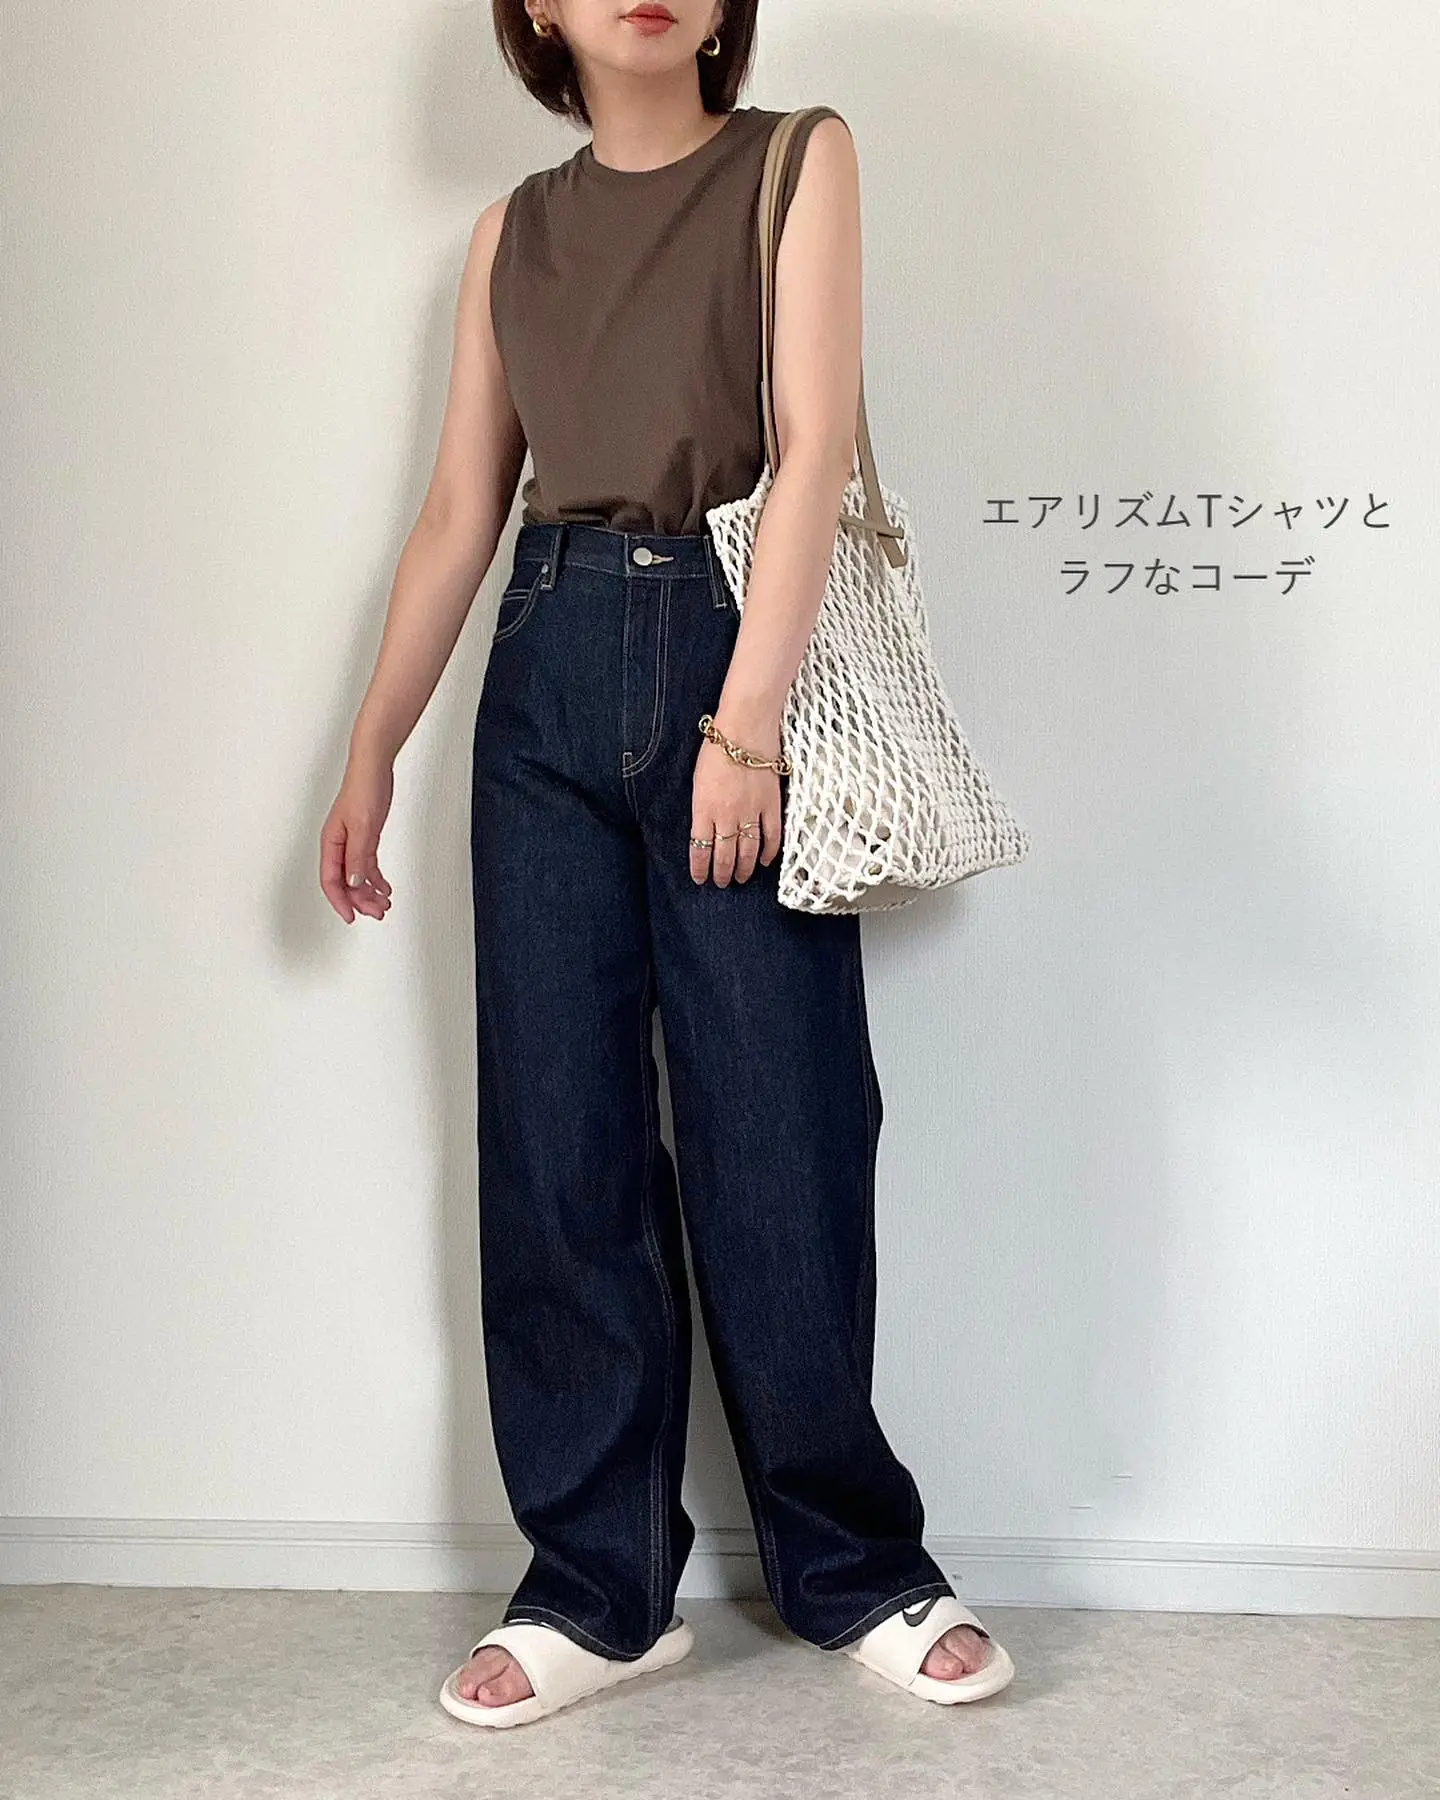 UNIQLO's Popular Items / Baggy Jeans Corde, Gallery posted by maiko_wear